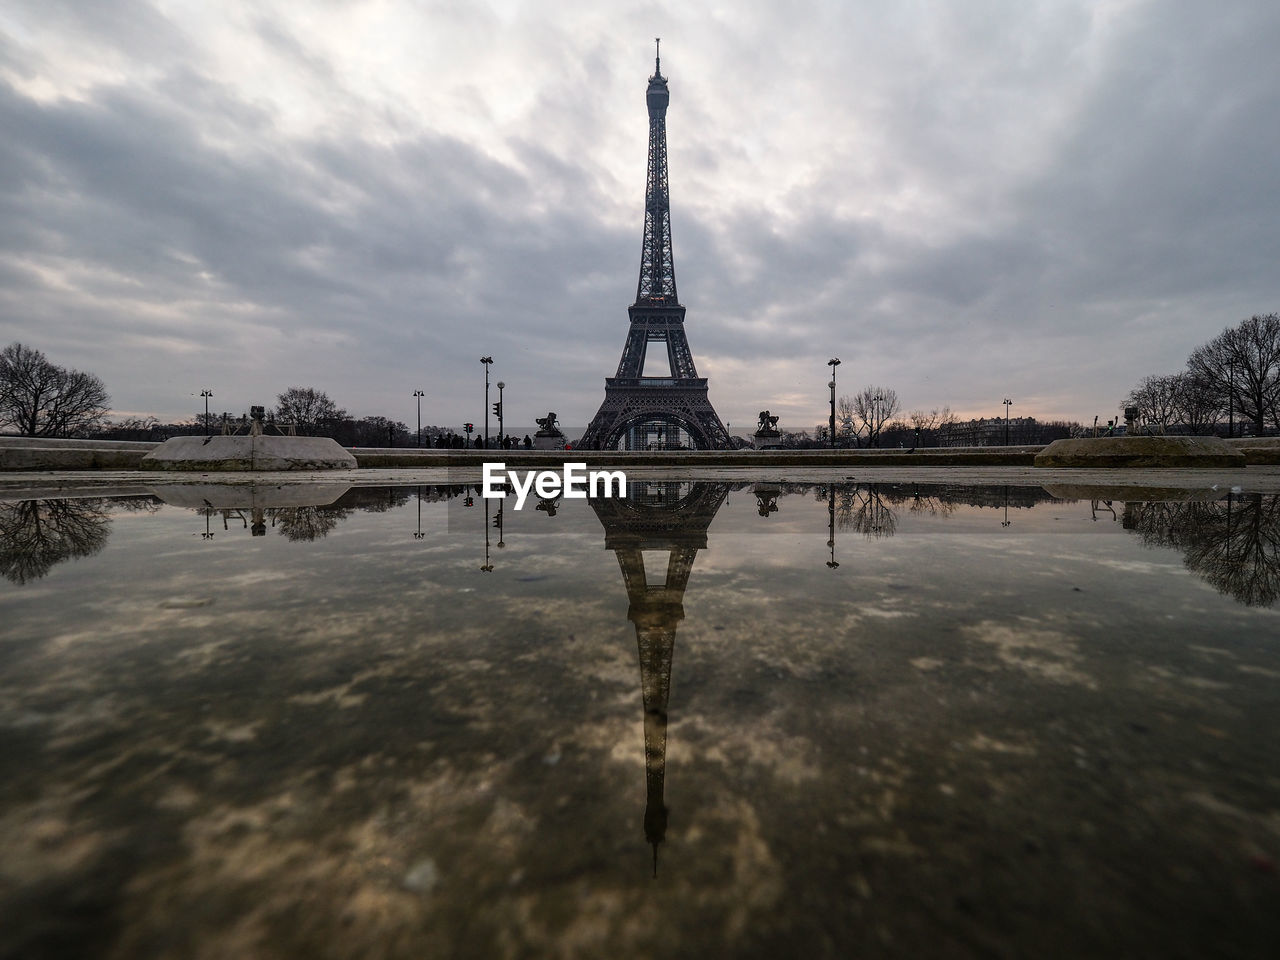 REFLECTION OF TOWER ON WATER